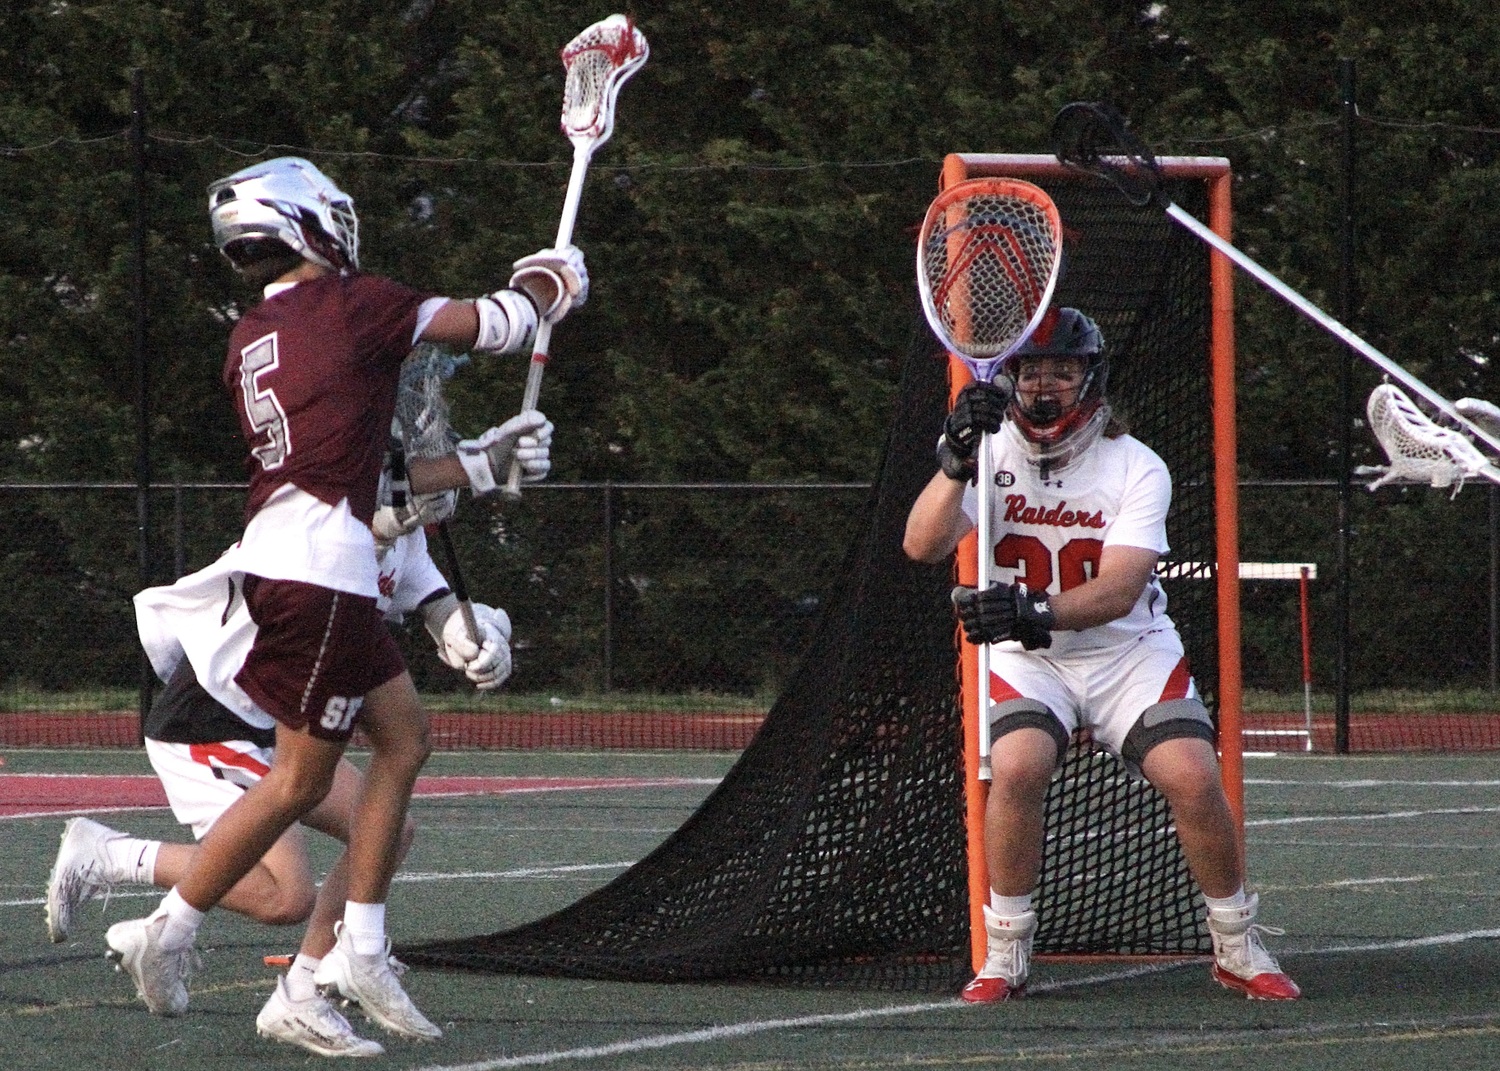 Senior midfielder JP Amaden faces firing before dishing the ball off to sophomore attack Slate Glick for the game-tying goal with 8 seconds left. DESIRÉE KEEGAN